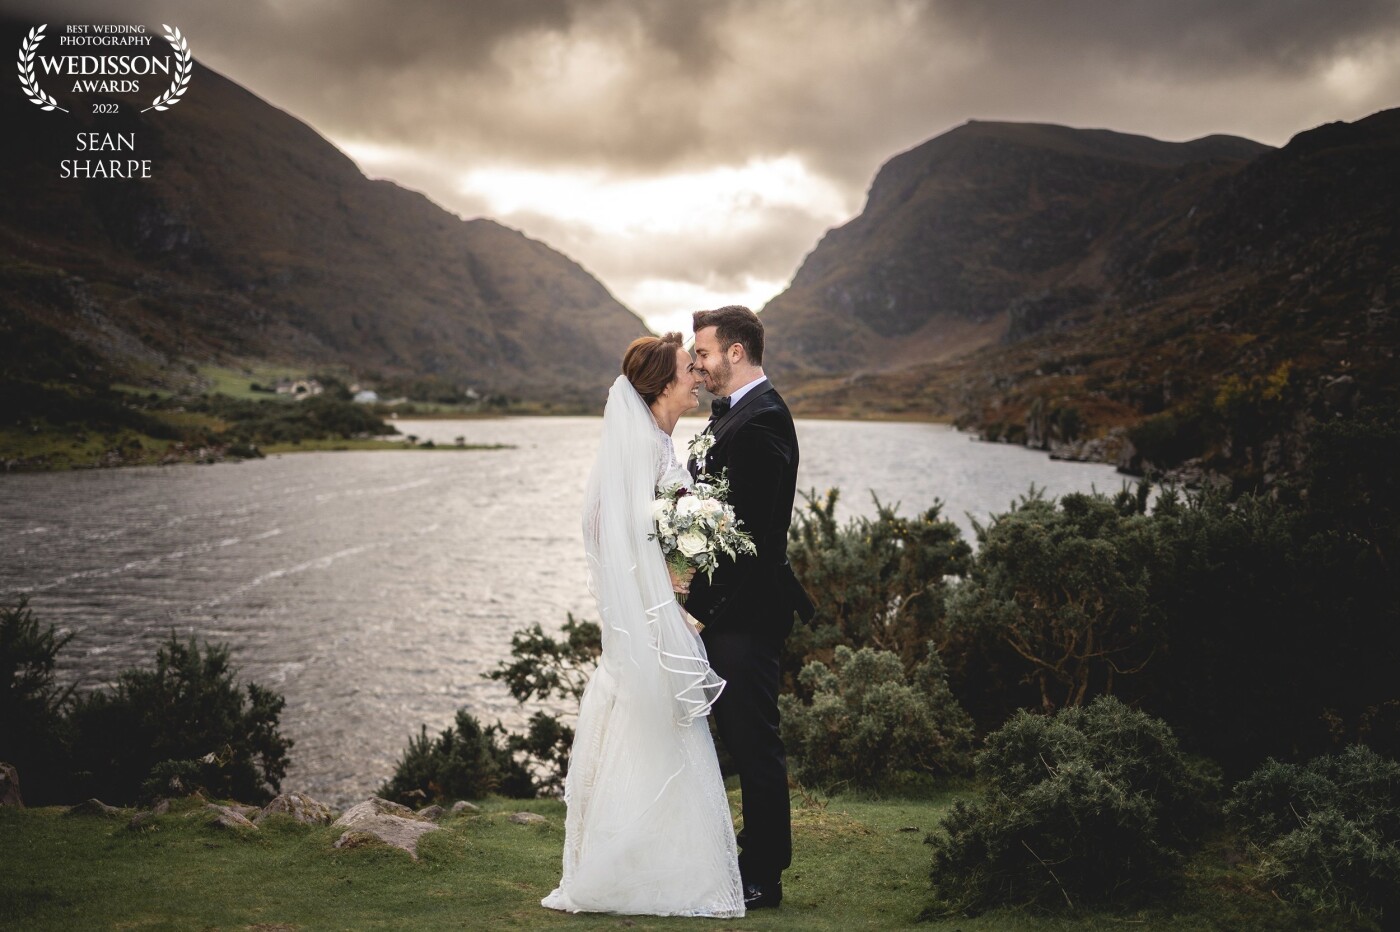 What a great shoot with James and Aisling in the Gap of Dunloe. Always worth jumping over a gate to get to a spot - always proves the effort is worth it! Loved this wedding day!